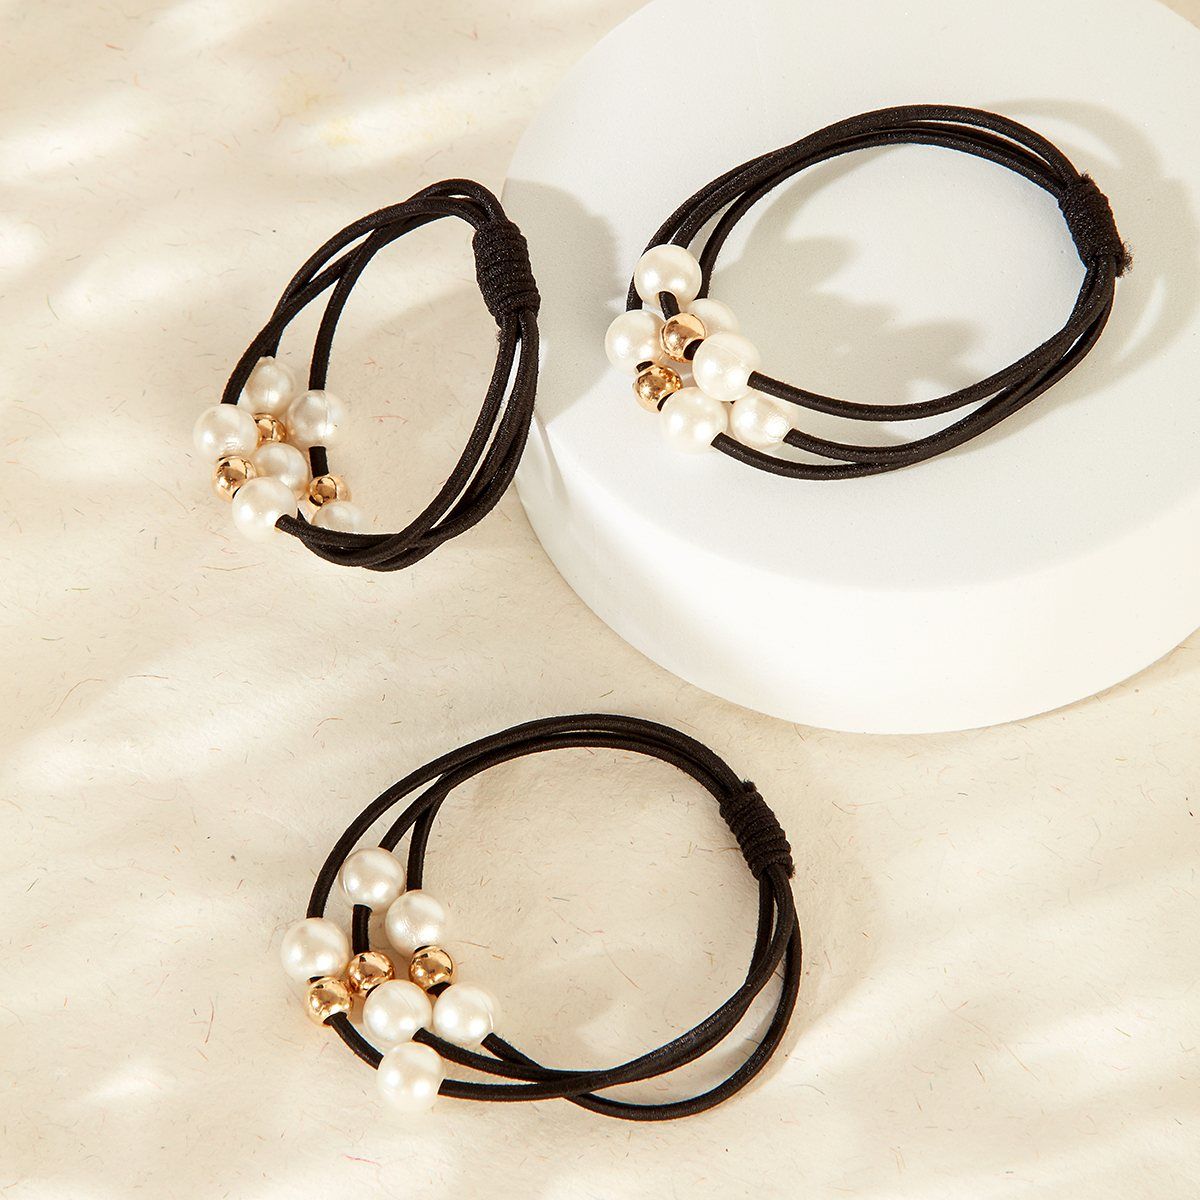 SET OF 3 CONTEMPORARY PEARLS STUDDED BLACK HAIR TIES